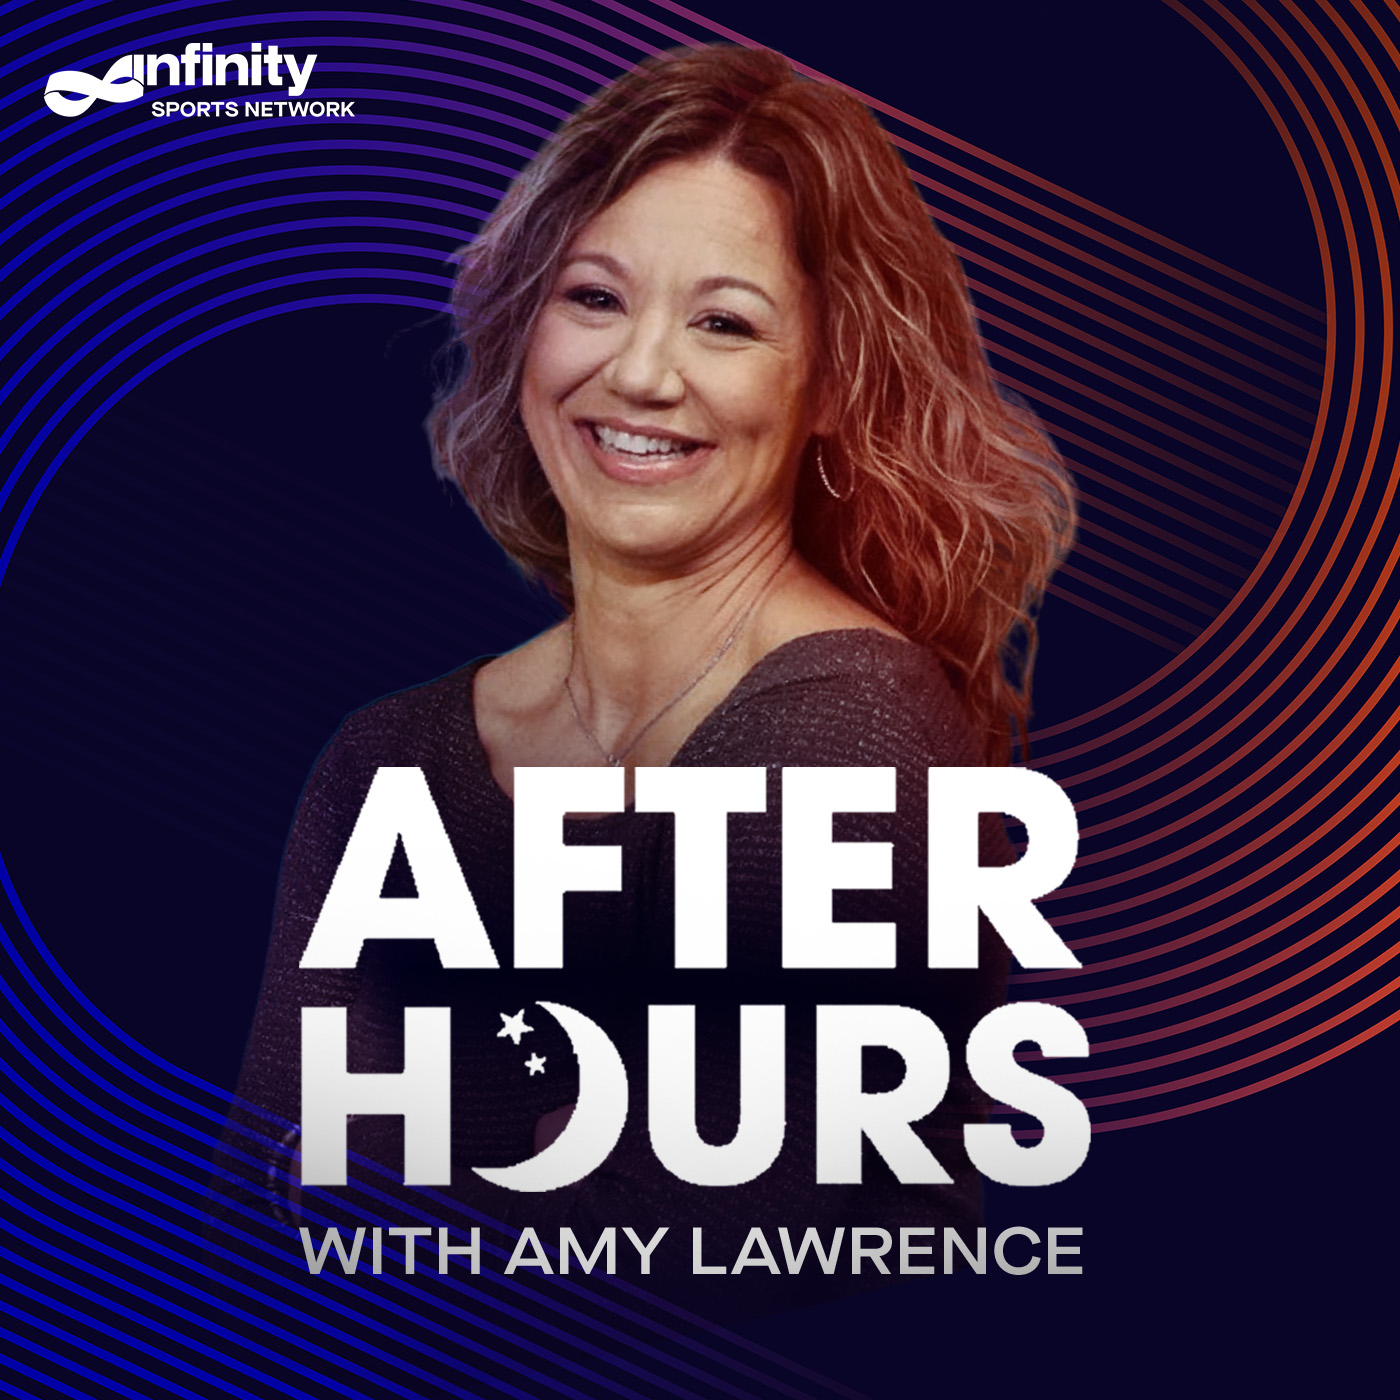 6/2/20 After Hours with Amy Lawrence PODCAST: Hour 2